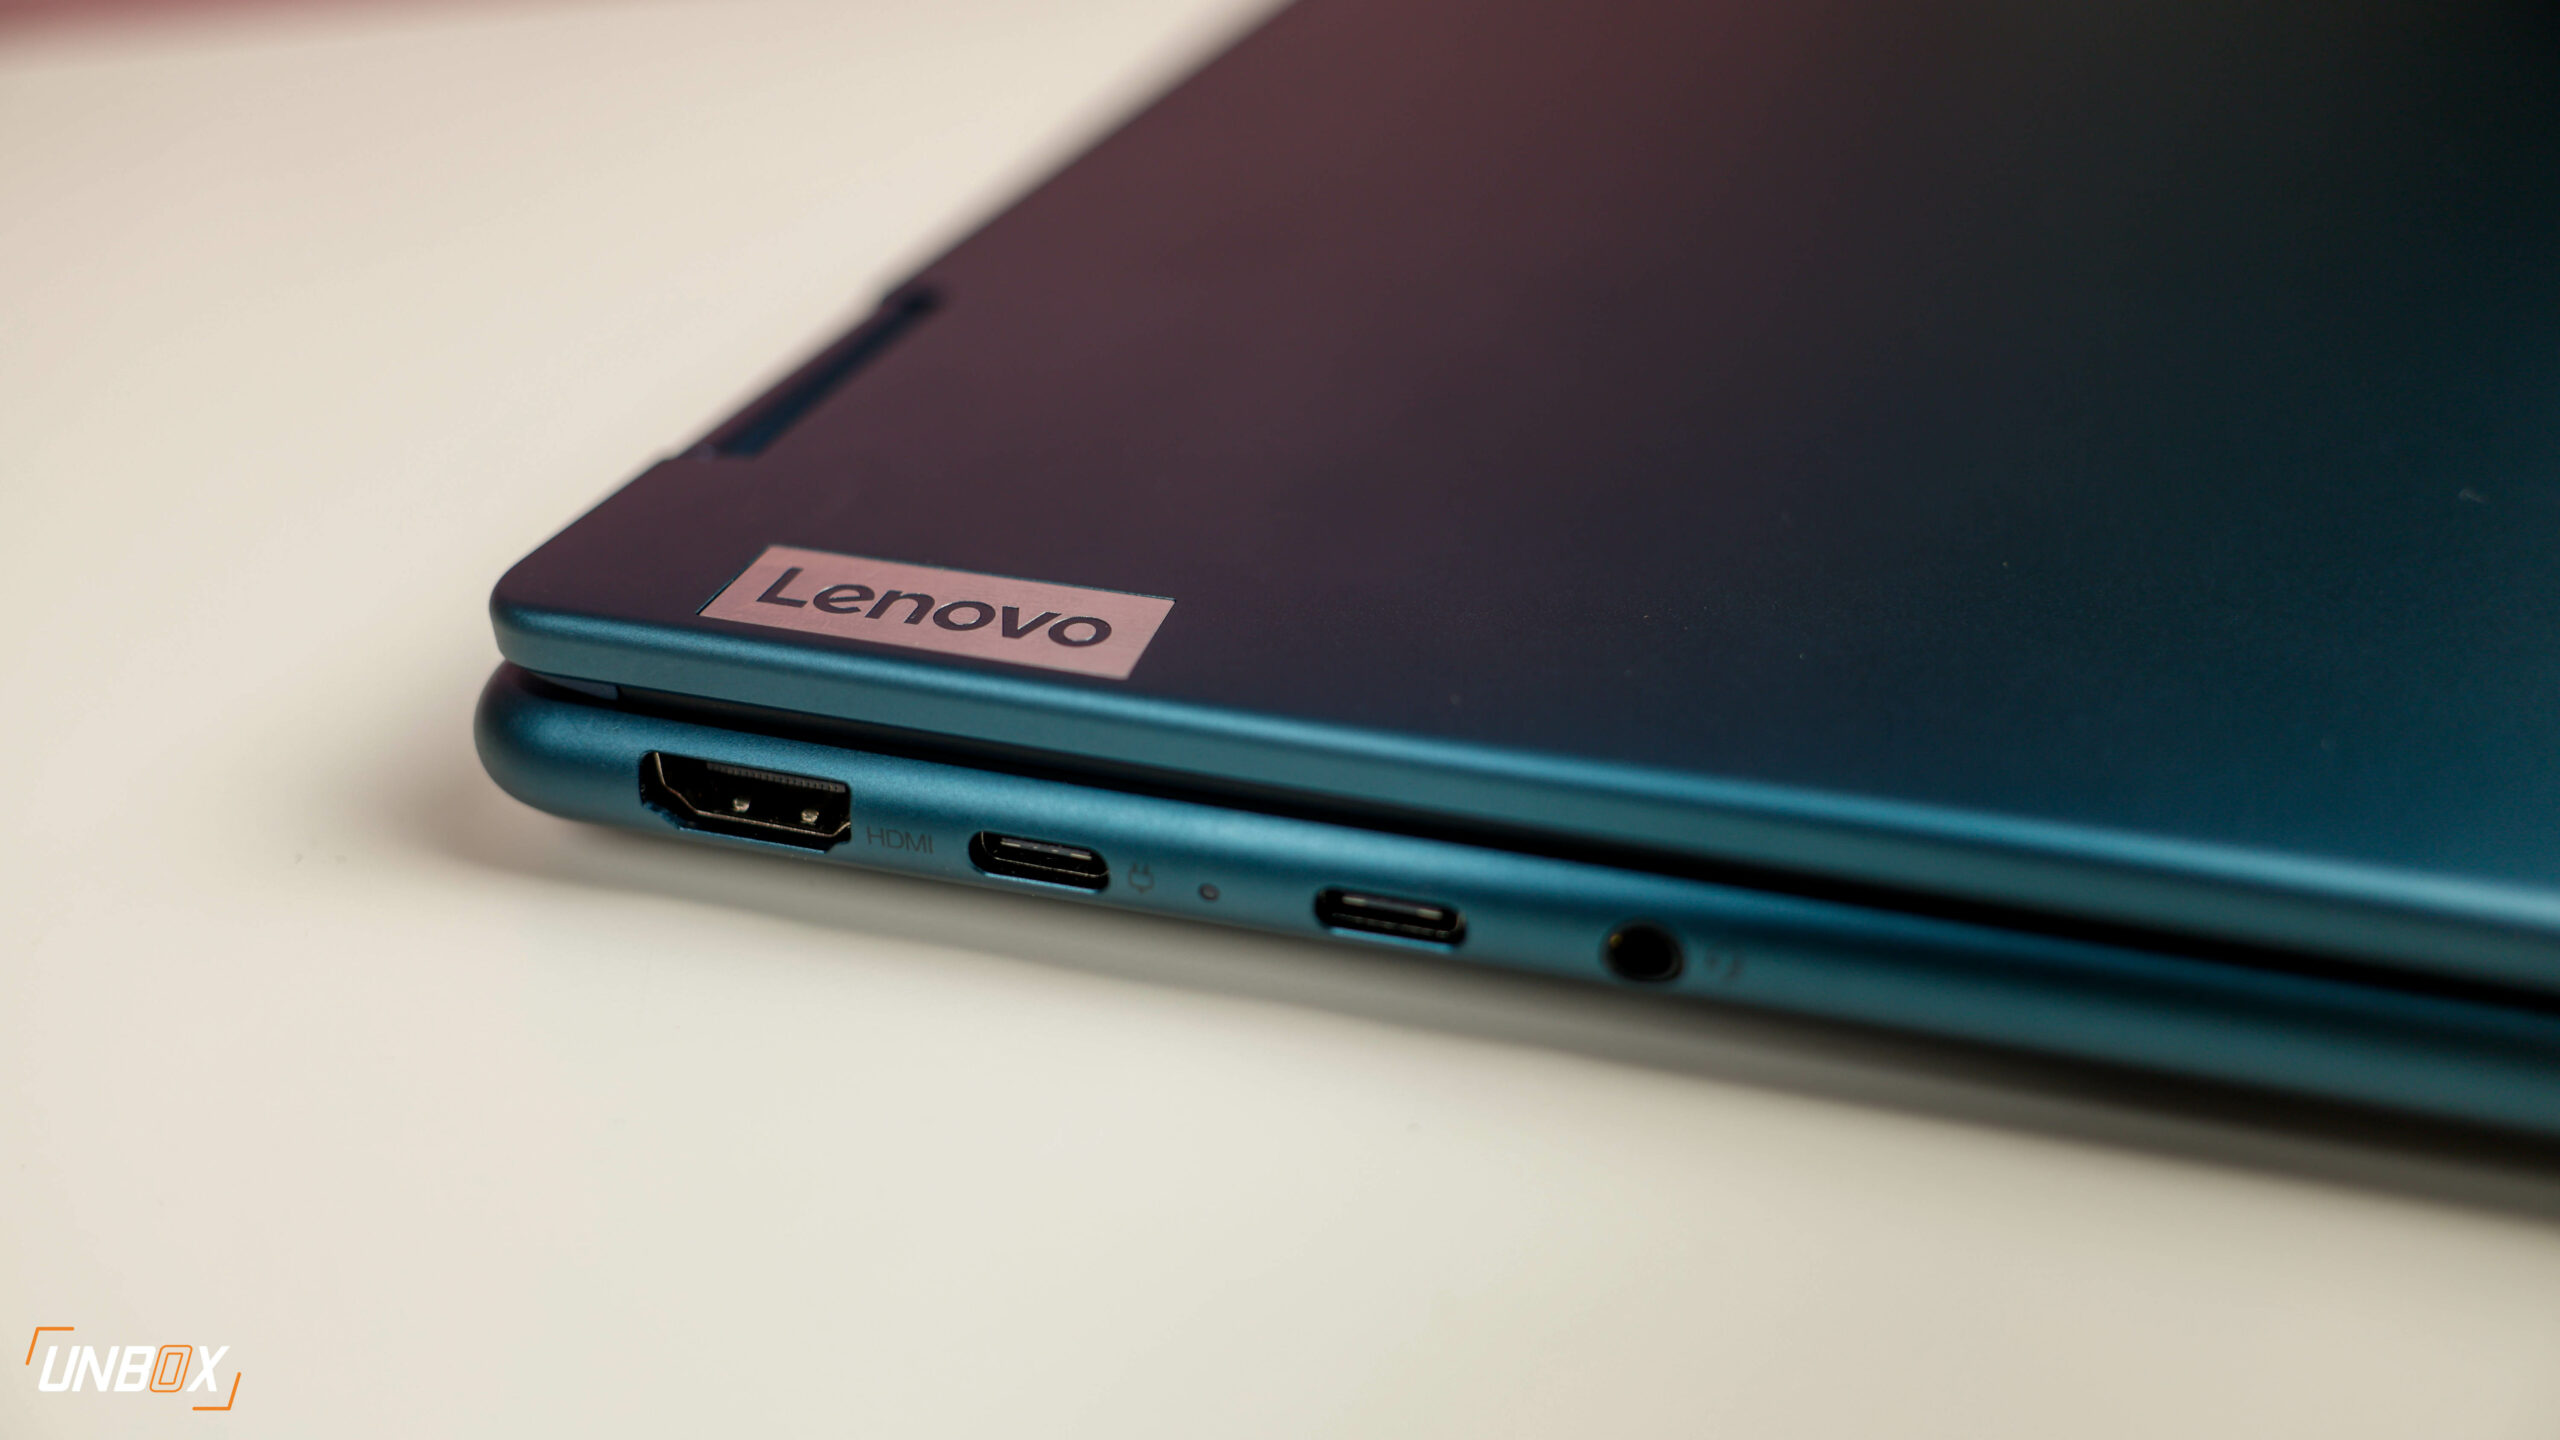 8th Gen Lenovo Yoga 7: A Proven 2-in-1 Laptop Made Even Better